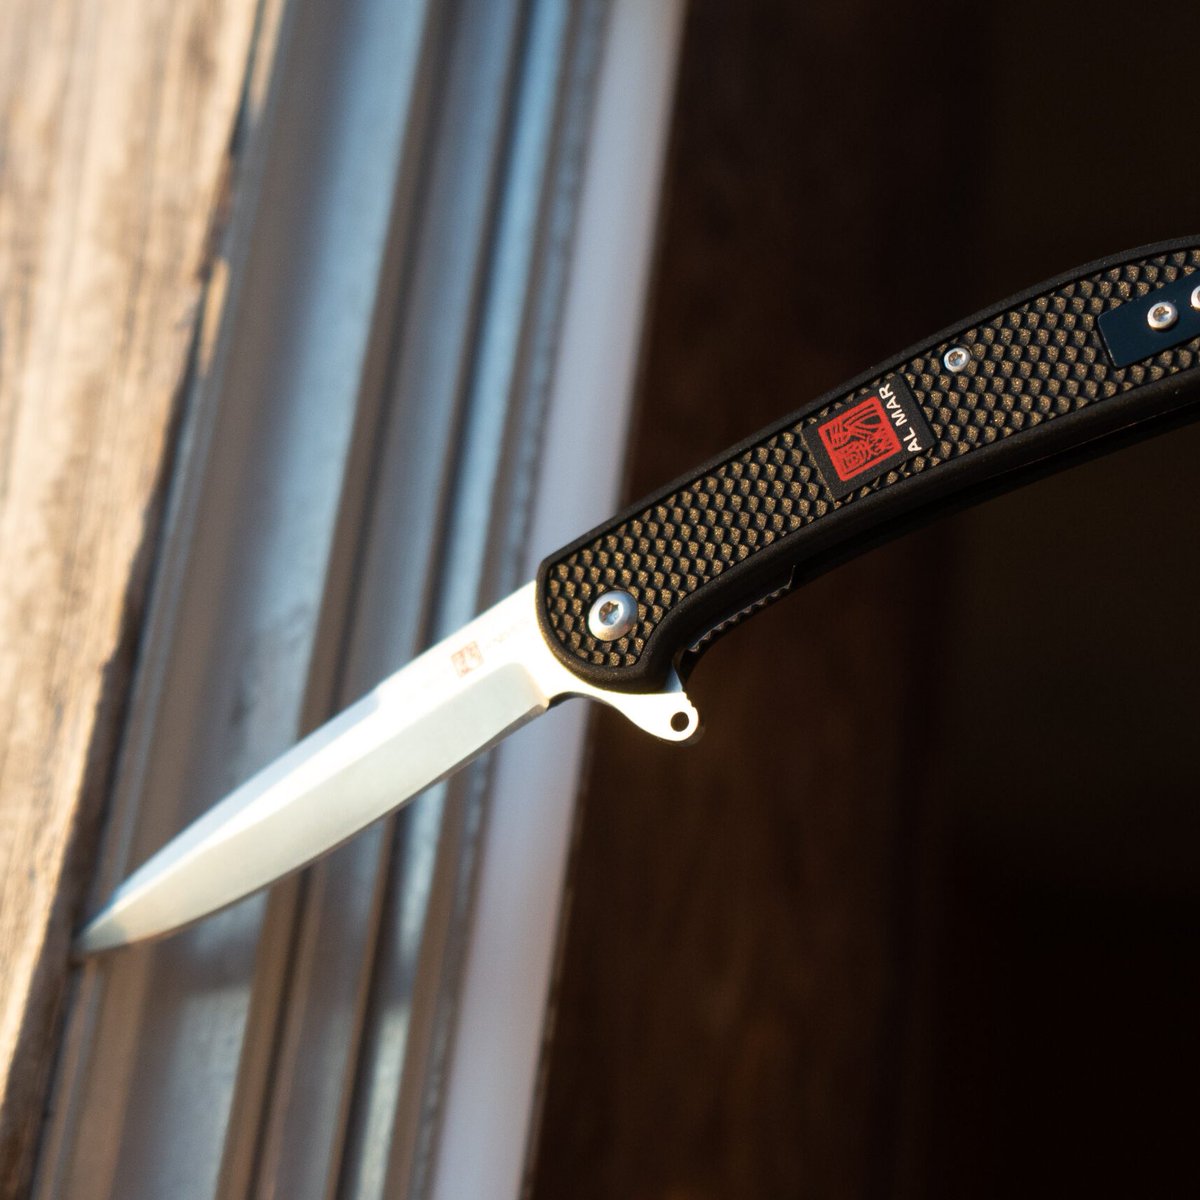 Precision-crafted for the most discerning adventurers. Get your hands this Ultralight Al Mar Knife today. #knife #knives #knifelife #everydaycarry #handmade #knifecut #knifemaker #knifemaking #blade 

bit.ly/42xxOrS